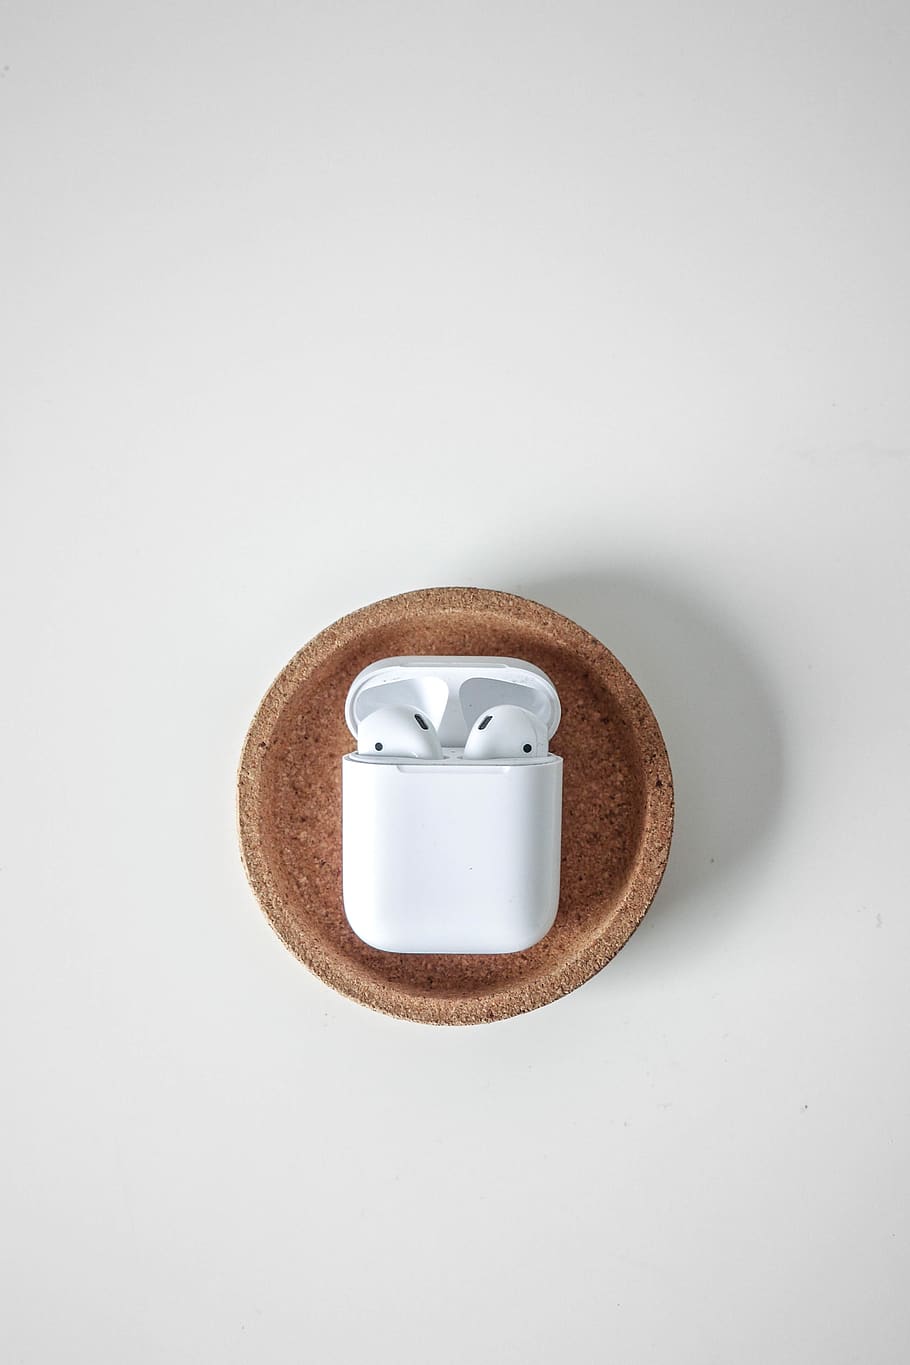 airpods, brown, white, beauty, cork, technology, headphones